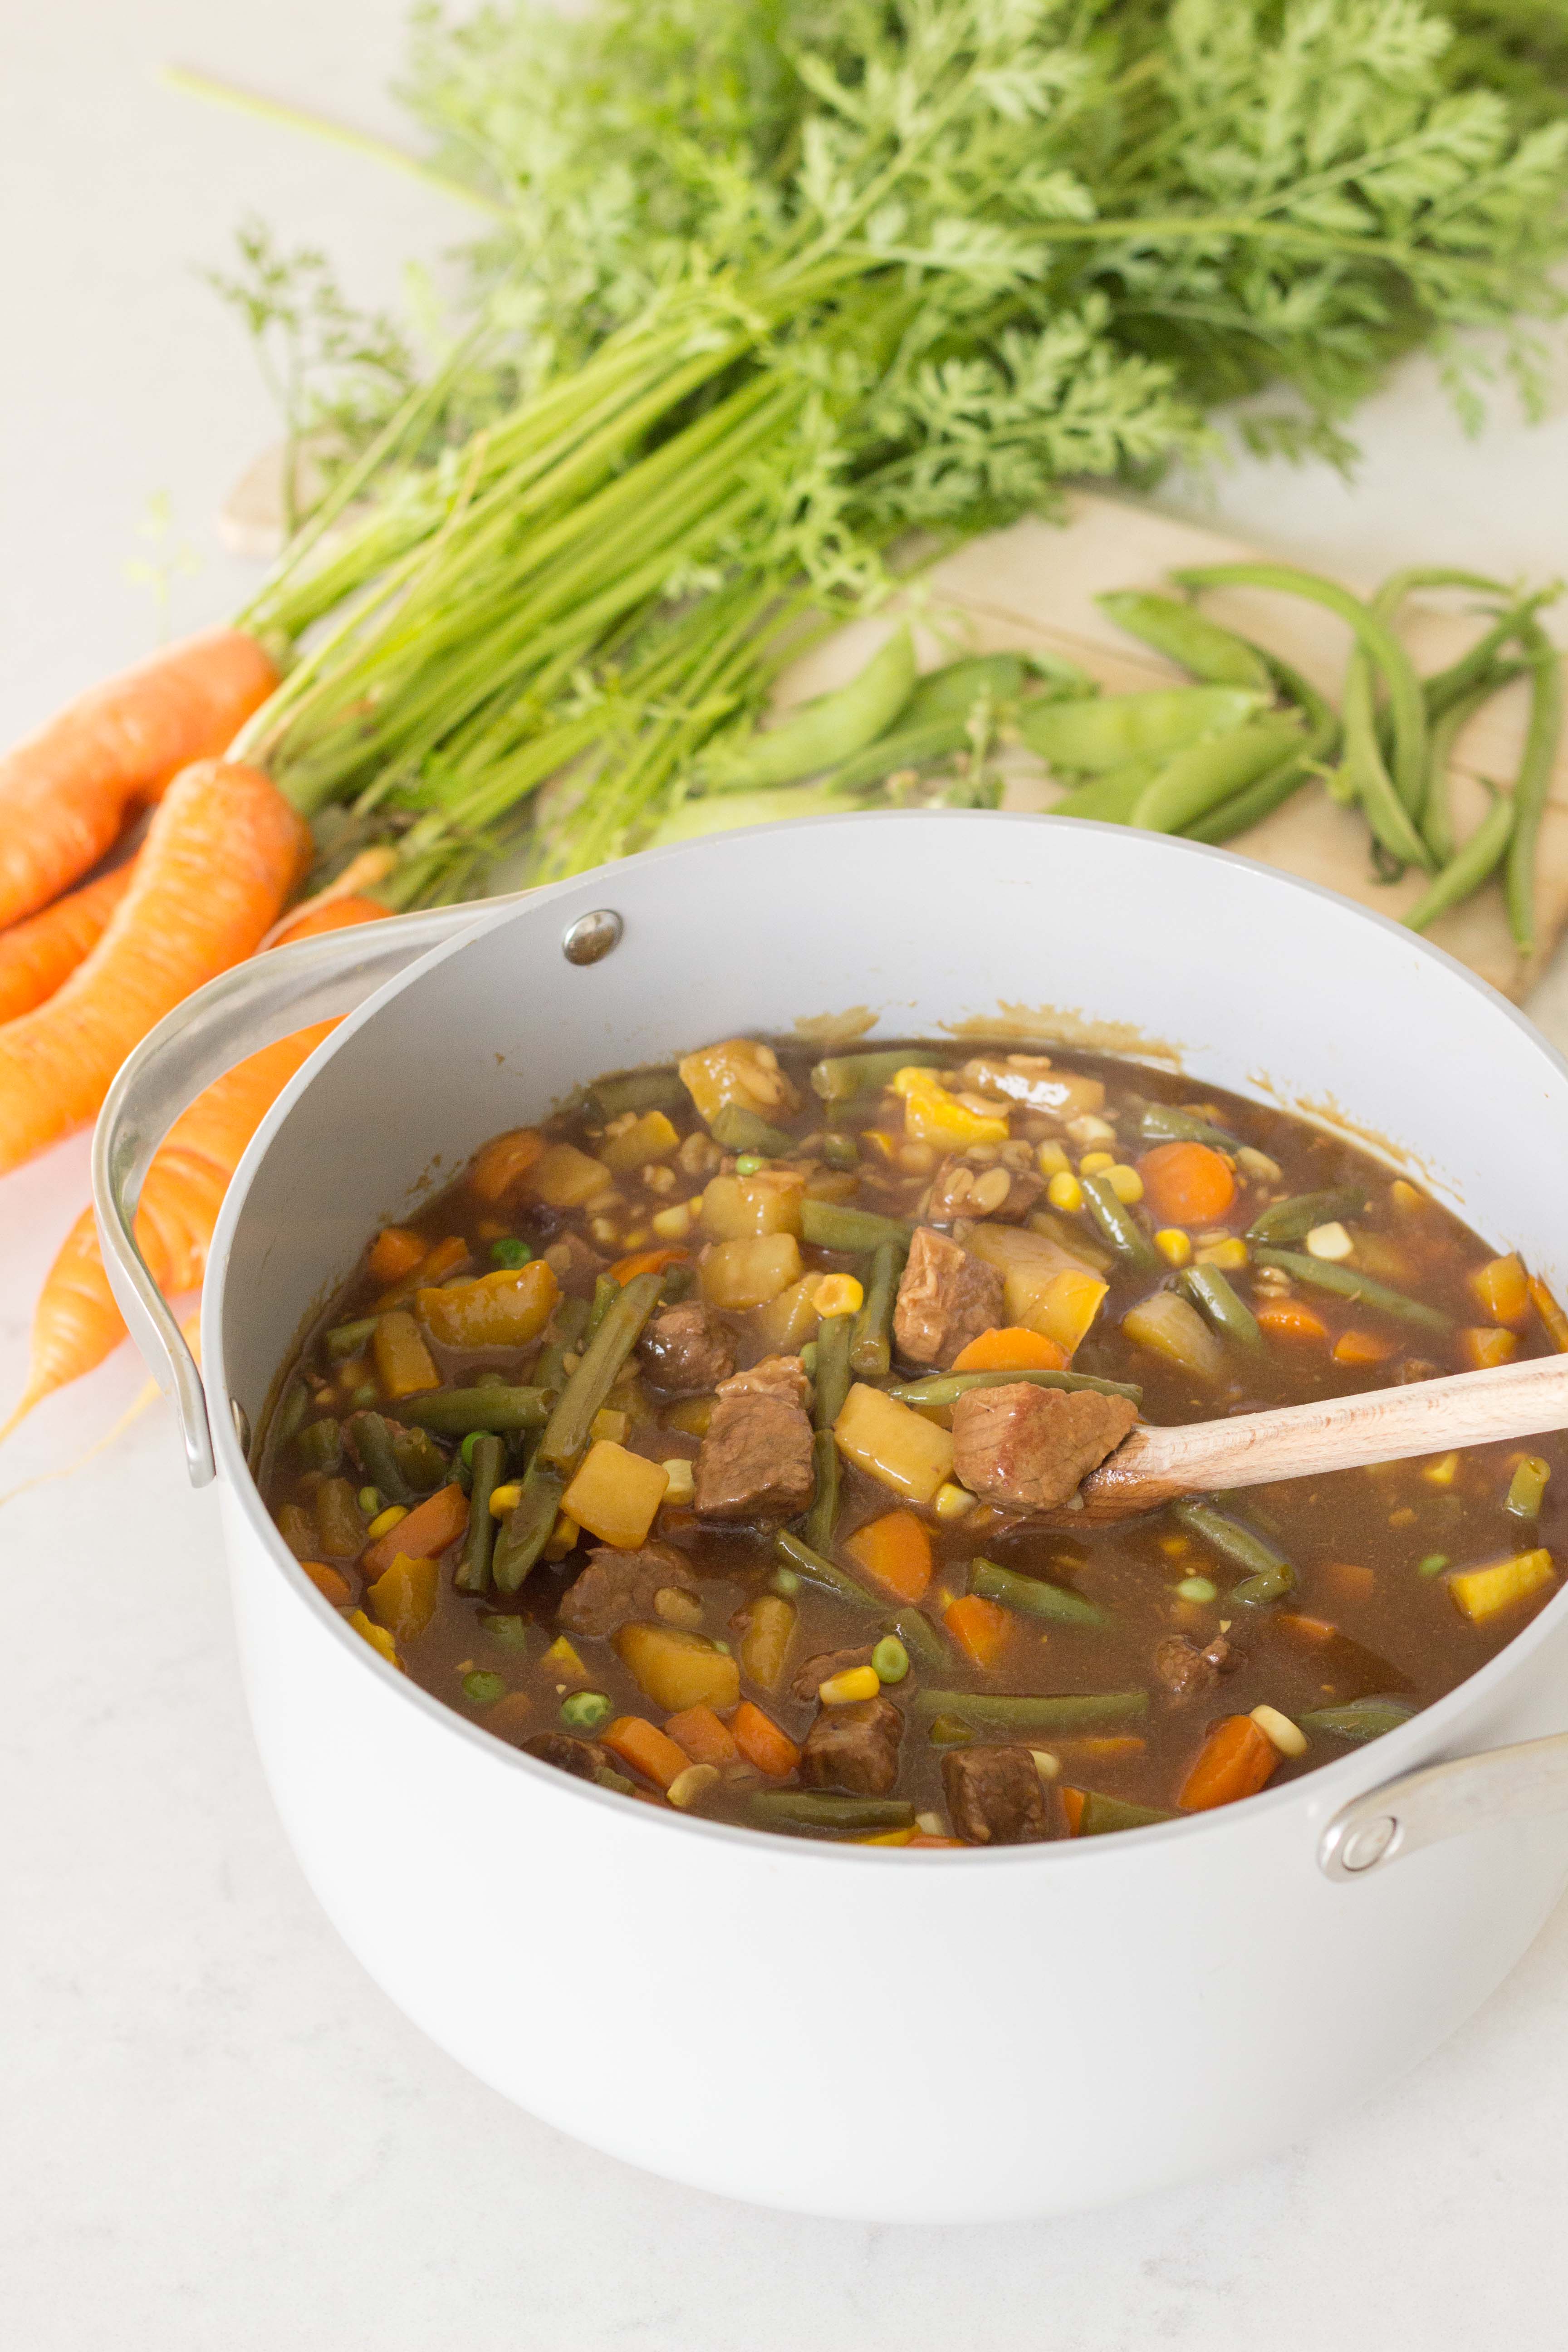 Rich Beef and Barley Stew